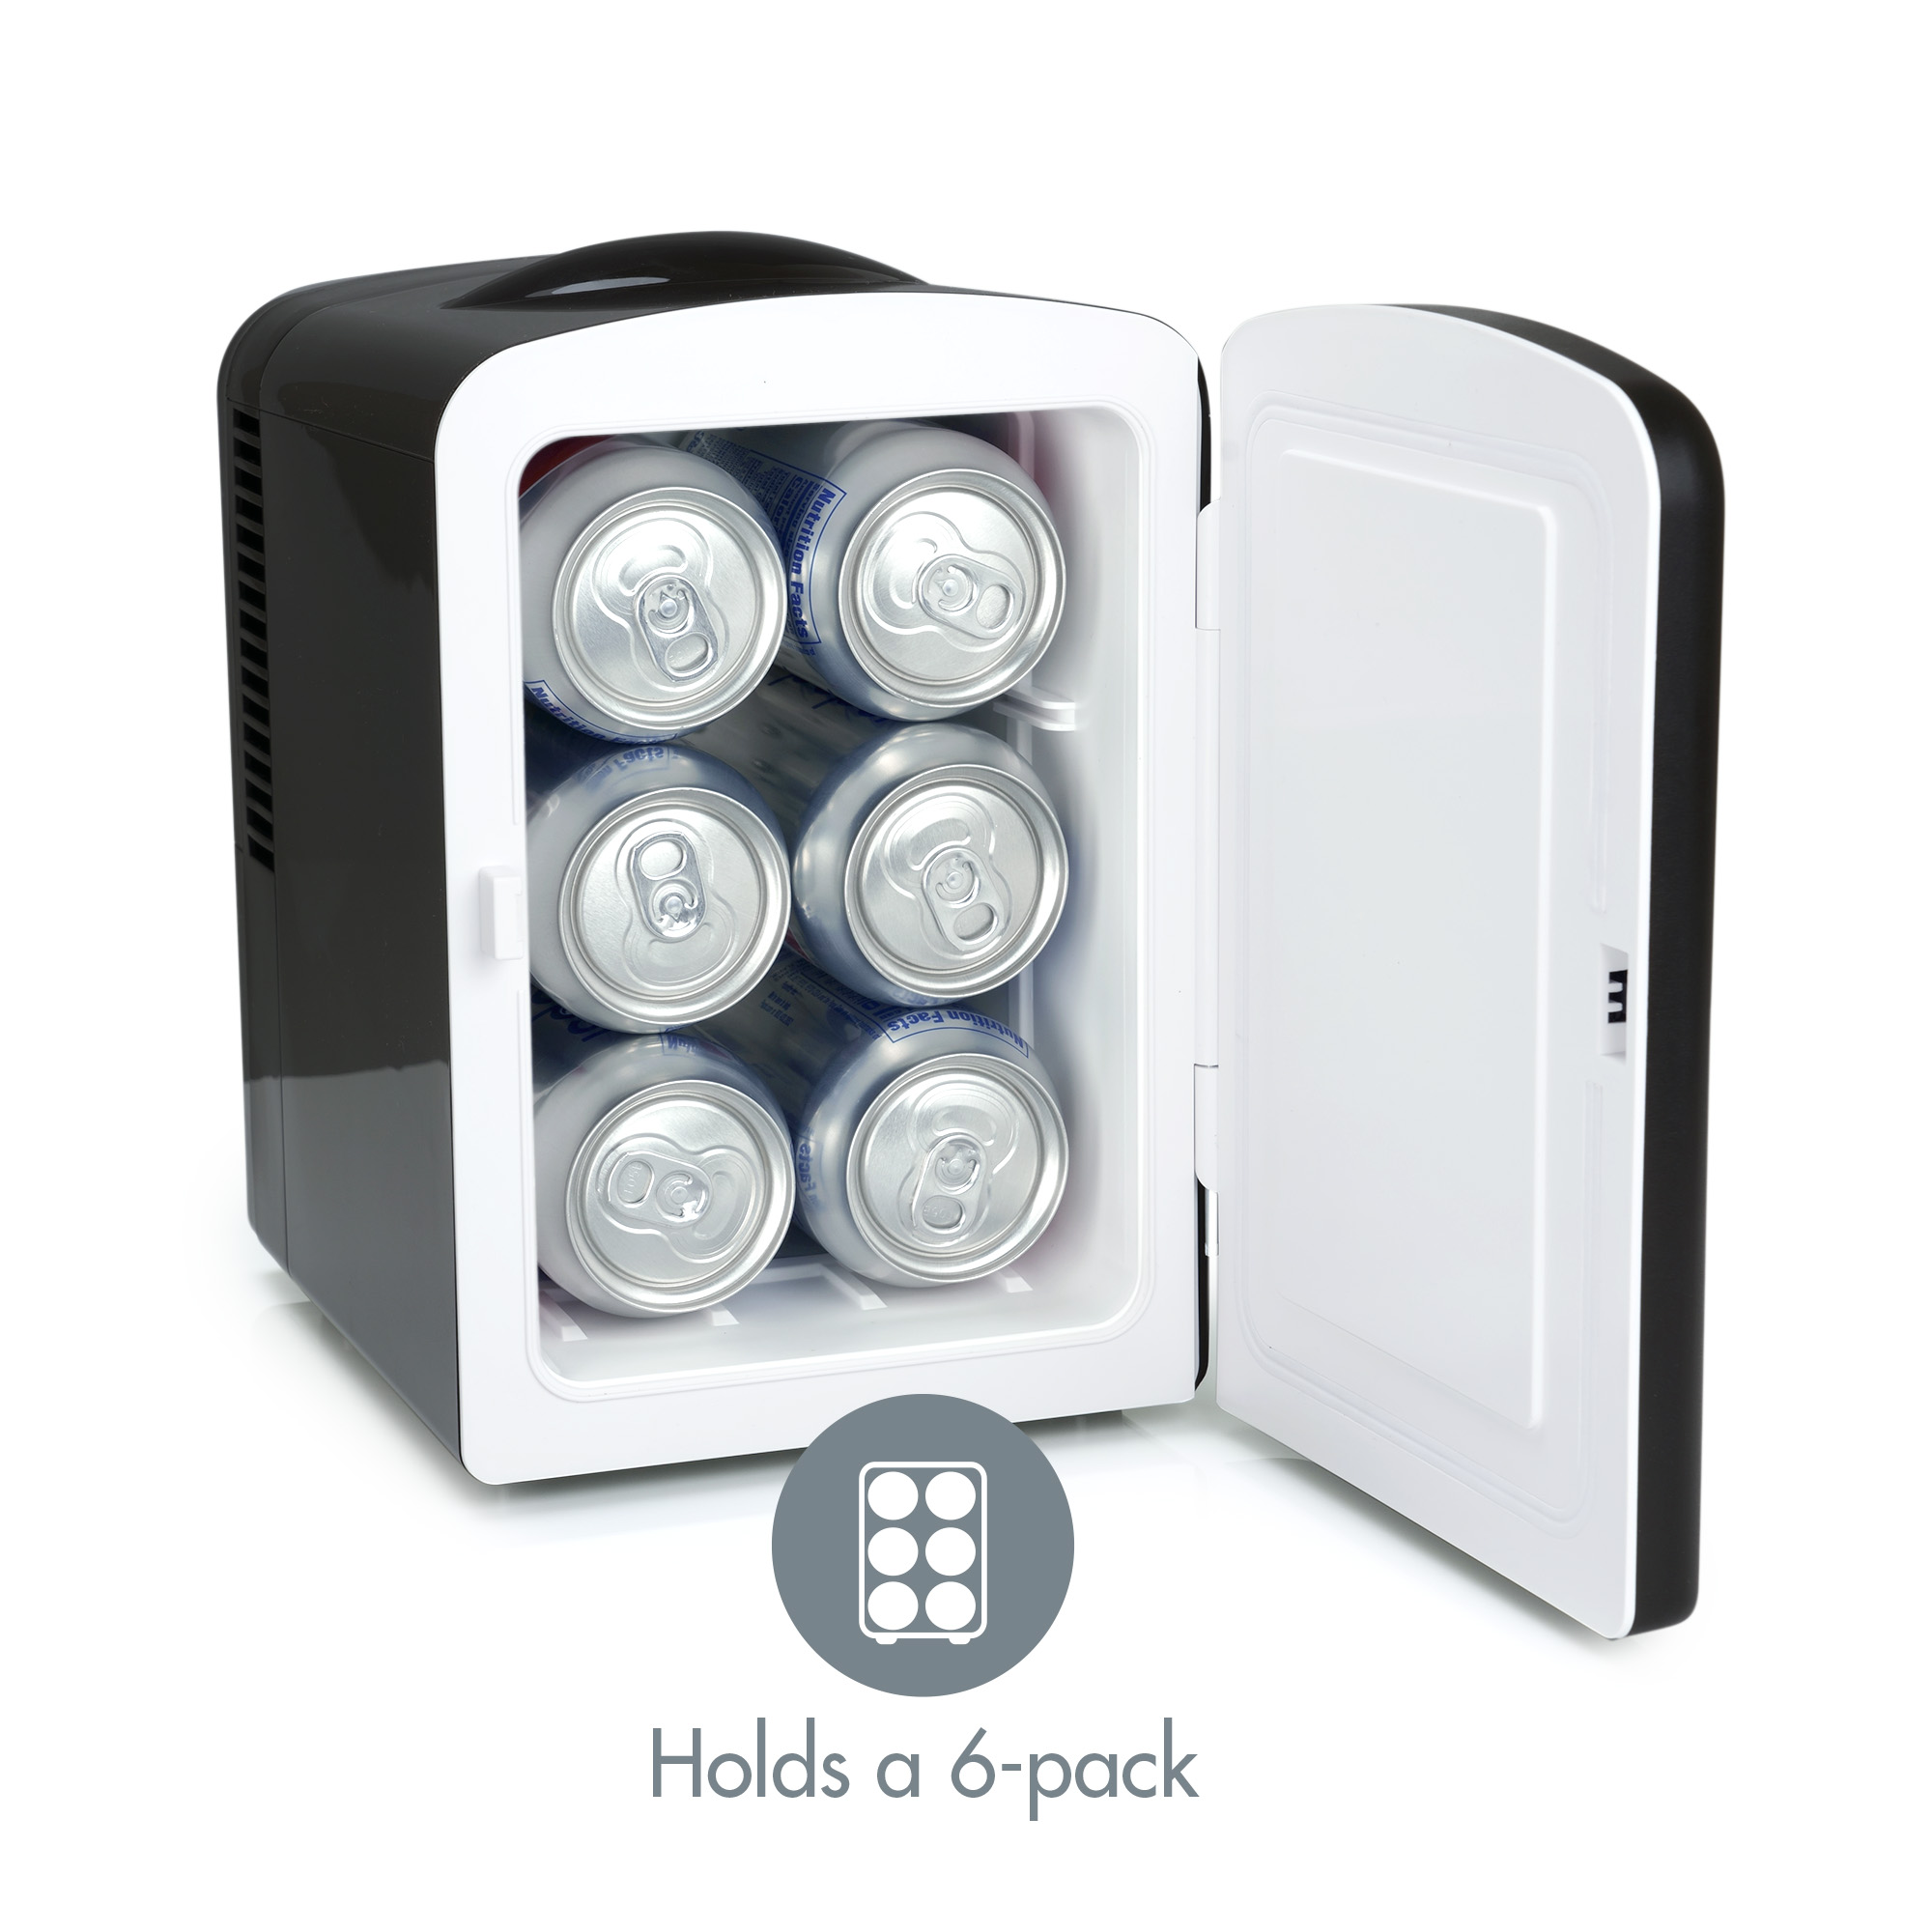 Personal Chiller 6 Can Mini Fridge Beverage and Skincare Refrigerator, Black - image 4 of 5